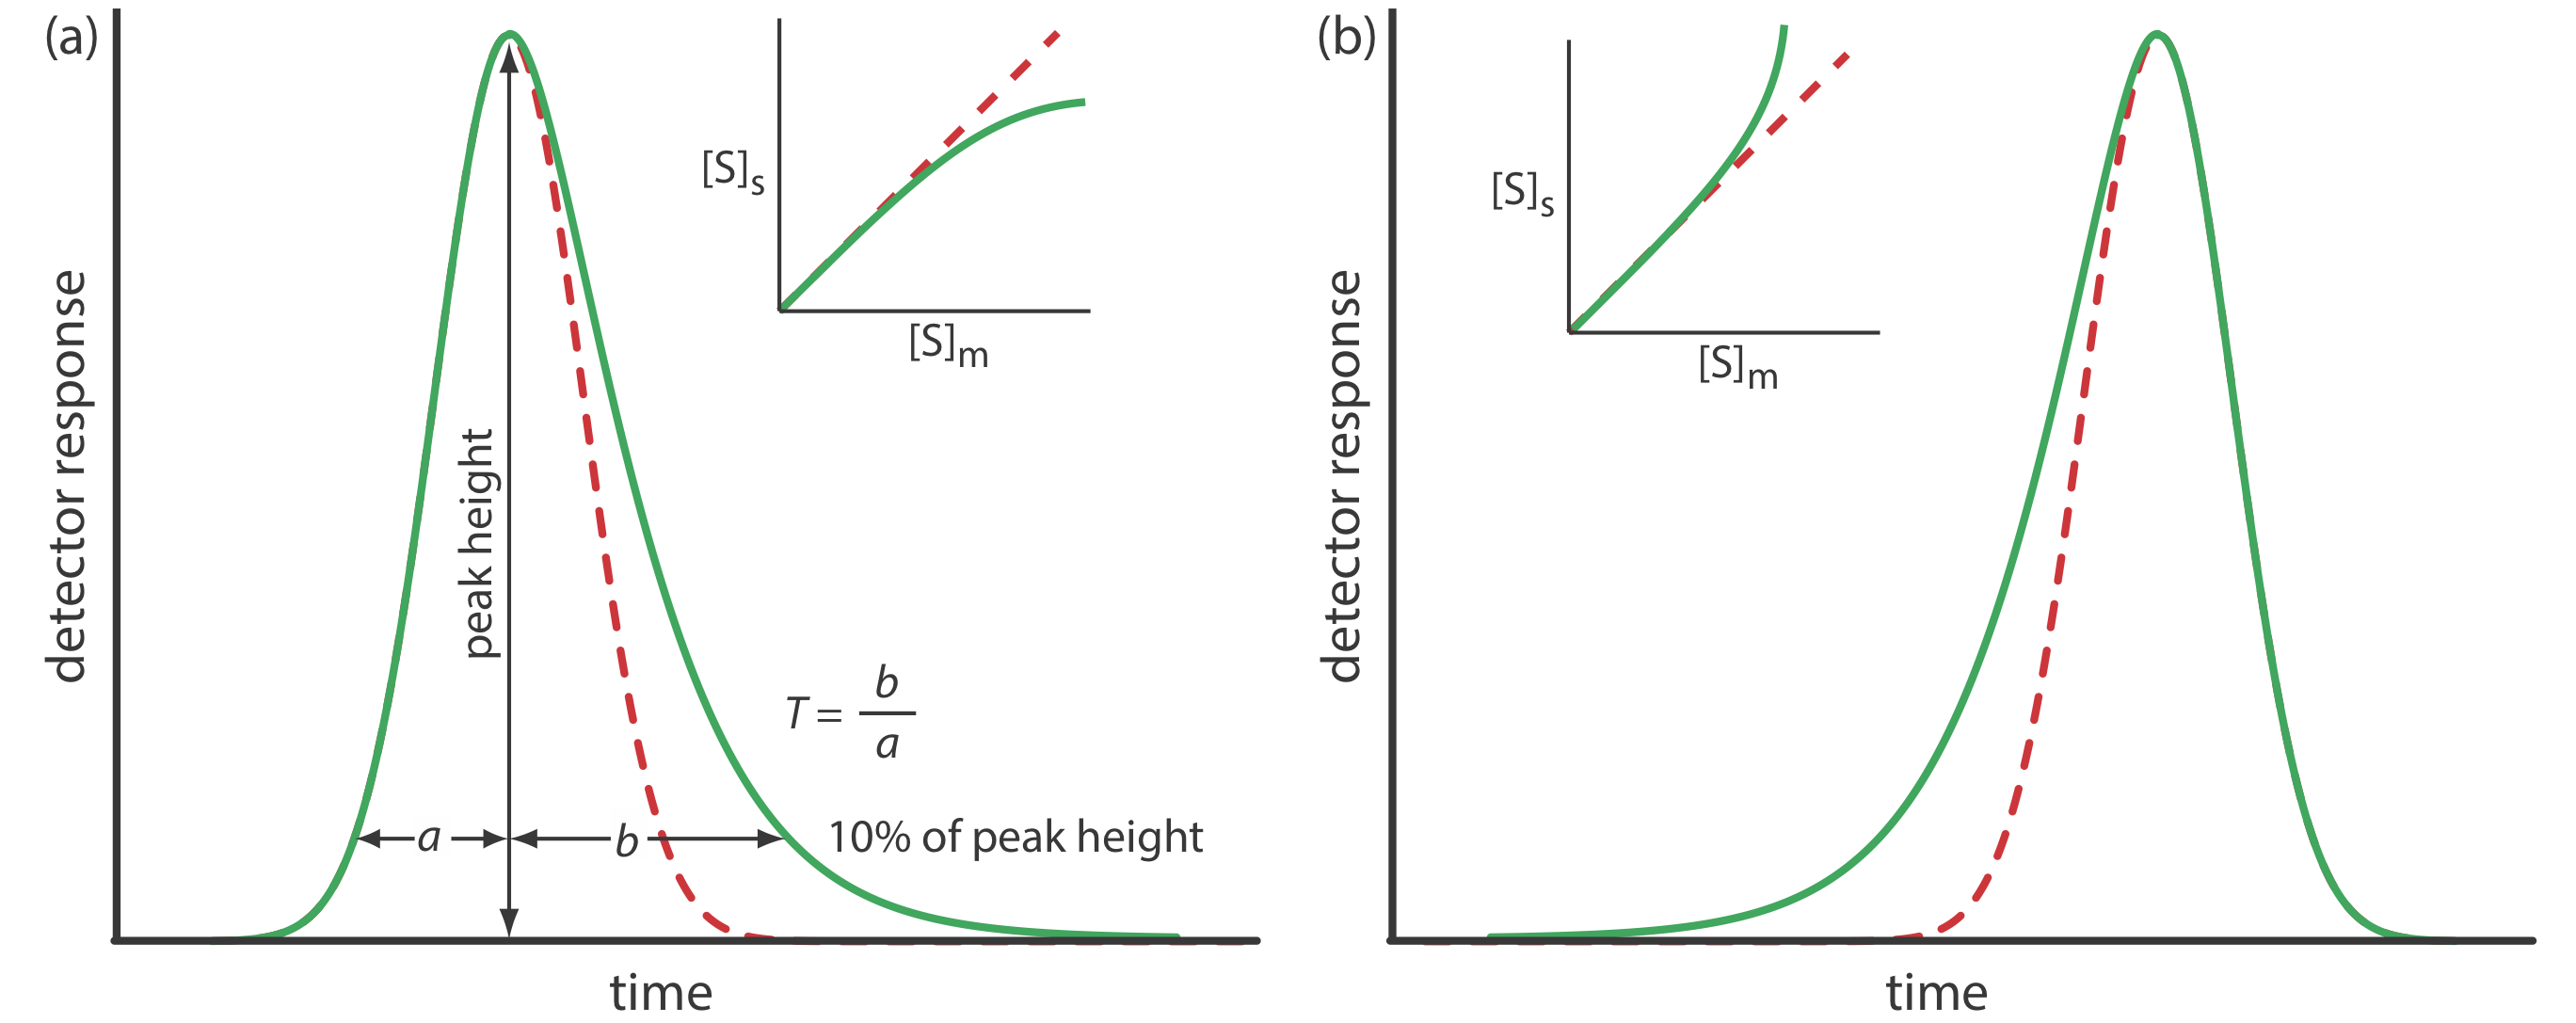 Examples of asymmetric chromatographic peaks showing (a) peak tailing and (b) peak fronting. For both (a) and (b) the green chromatogram is the asymmetric peak and the red dashed chromatogram shows the ideal, Gaussian peak shape. The insets show the relationship between the concentration of solute in the stationary phase, [S]s, and its concentration in the mobile phase, [S]m. The dashed red lines show ideal behavior (KD is constant for all conditions) and the green lines show nonideal behavior (KD decreases or increases for higher total concentrations of solute). A quantitative measure of peak tailing, T, is shown in (a).